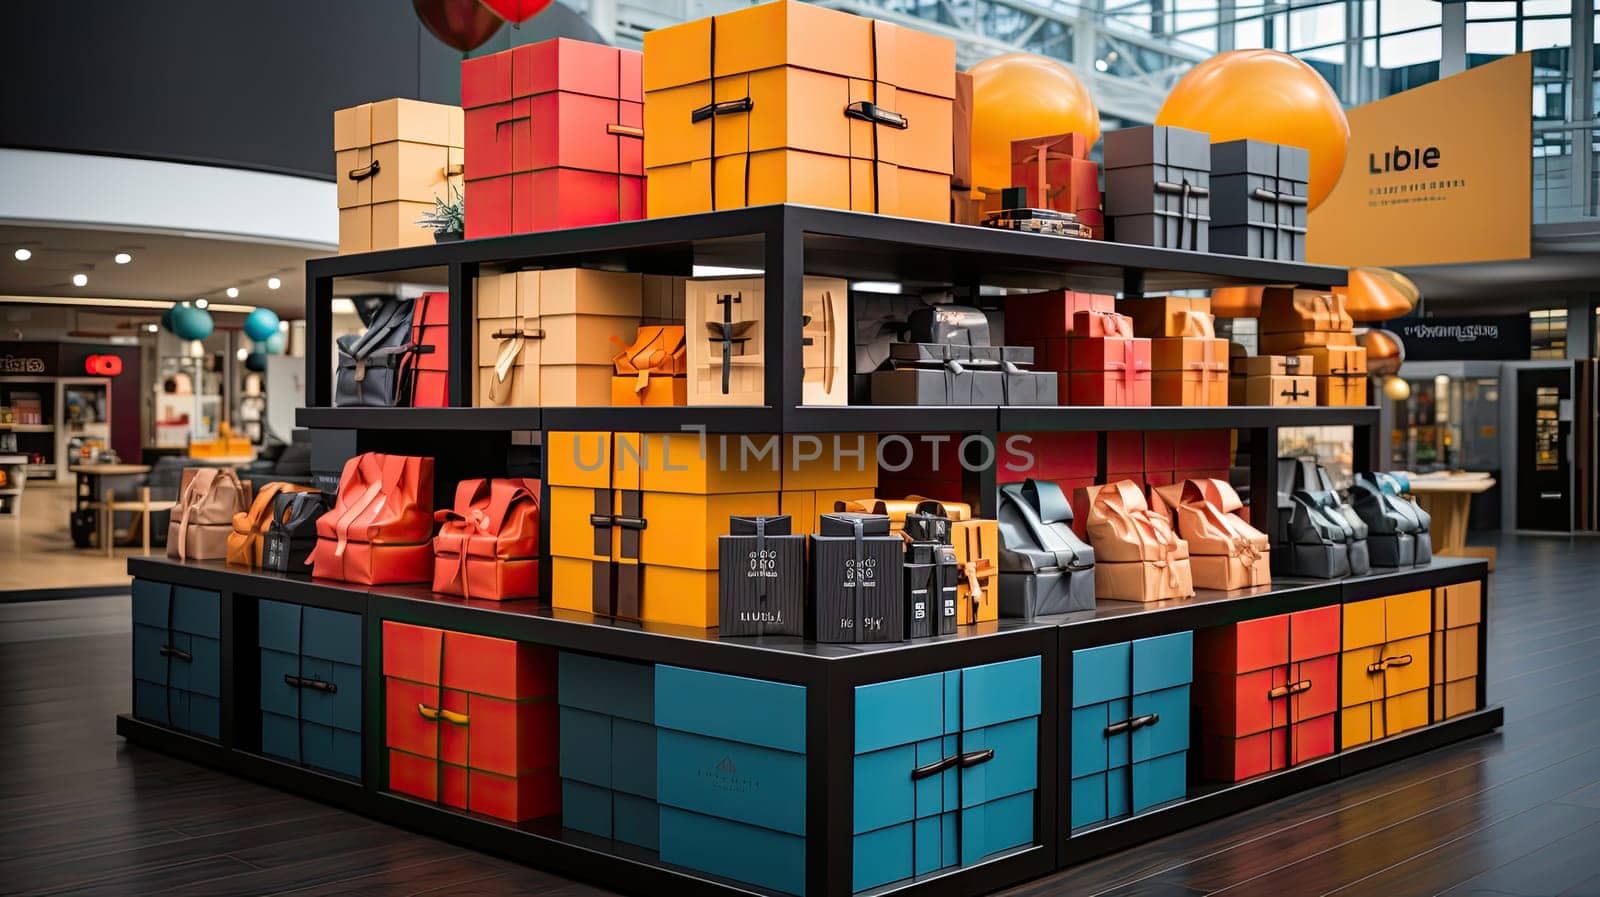 There are many festive gift boxes in the store, boxes of different sizes, AI by AnatoliiFoto